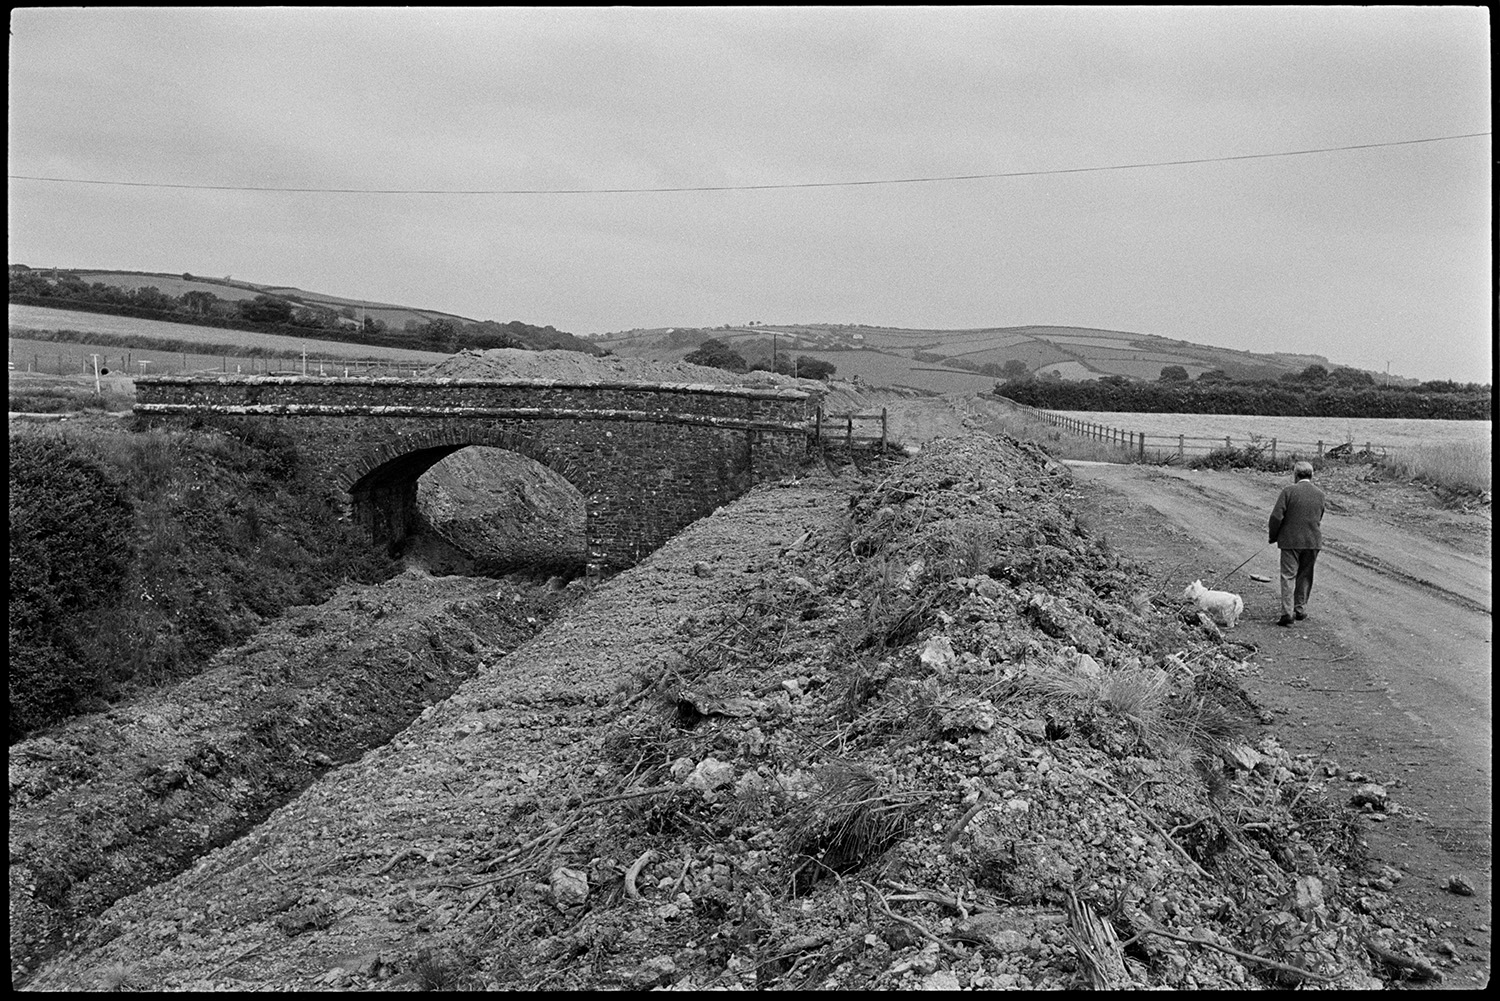 Site of new link road along old railway line. Stone bridge before demolition. Surveyor.<br />
[A man walking his dog next to the construction site, near South Molton, of the North Devon Link road, along an old railway line. The stone bridge was later demolished.]